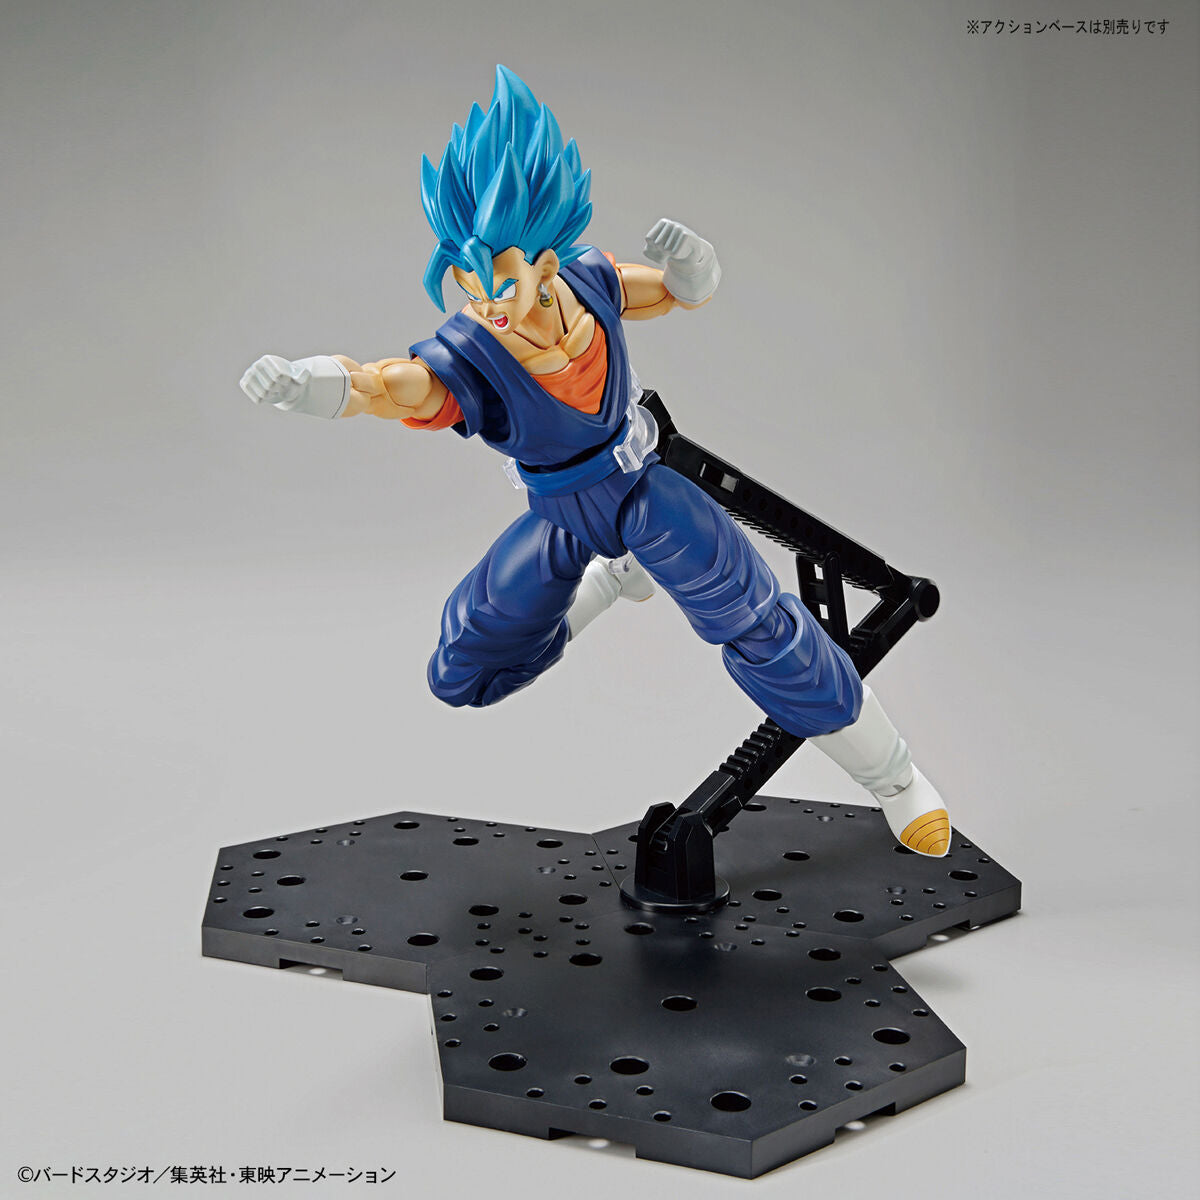 Dragon Ball - Super Saiyan God Vegito - Figure-rise Standard Model Kit, includes two facial expressions, seven interchangeable hand parts, and Vegito sword effect, sold by Nippon Figures.